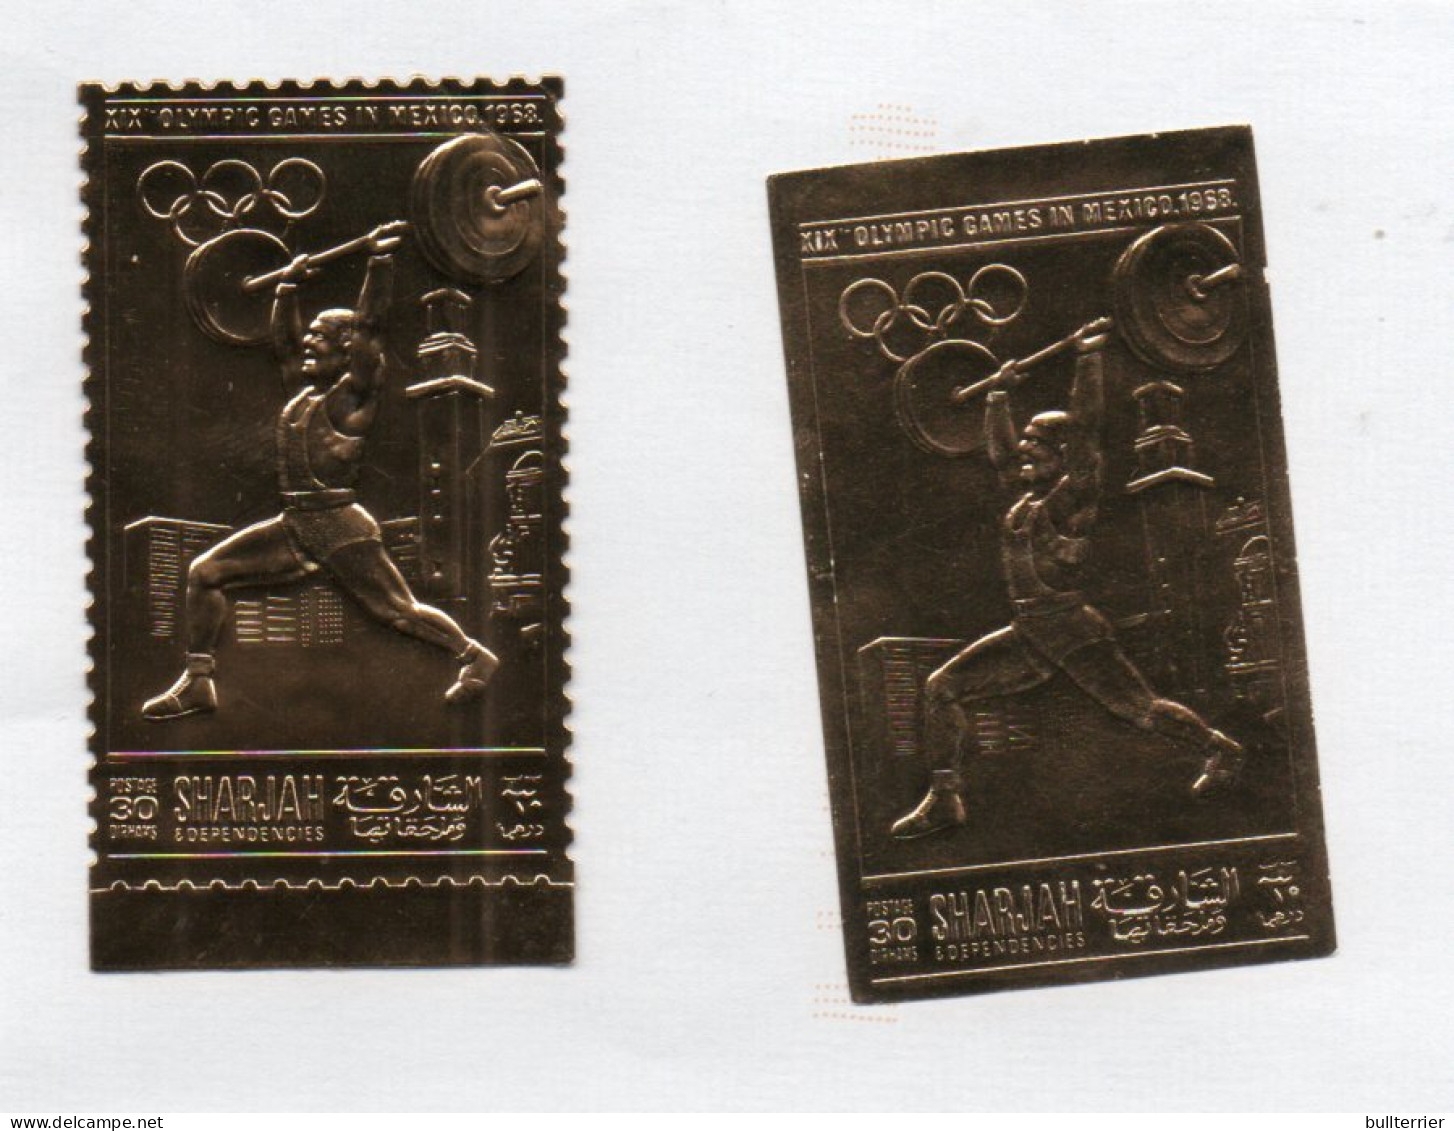 OLYMPICS - SHARJAH - 1968 -OLYMPICS / WEIGHTIFTING GOLD STAMP PERF & IMPERF MINT NEVER HINGED - Zomer 1968: Mexico-City